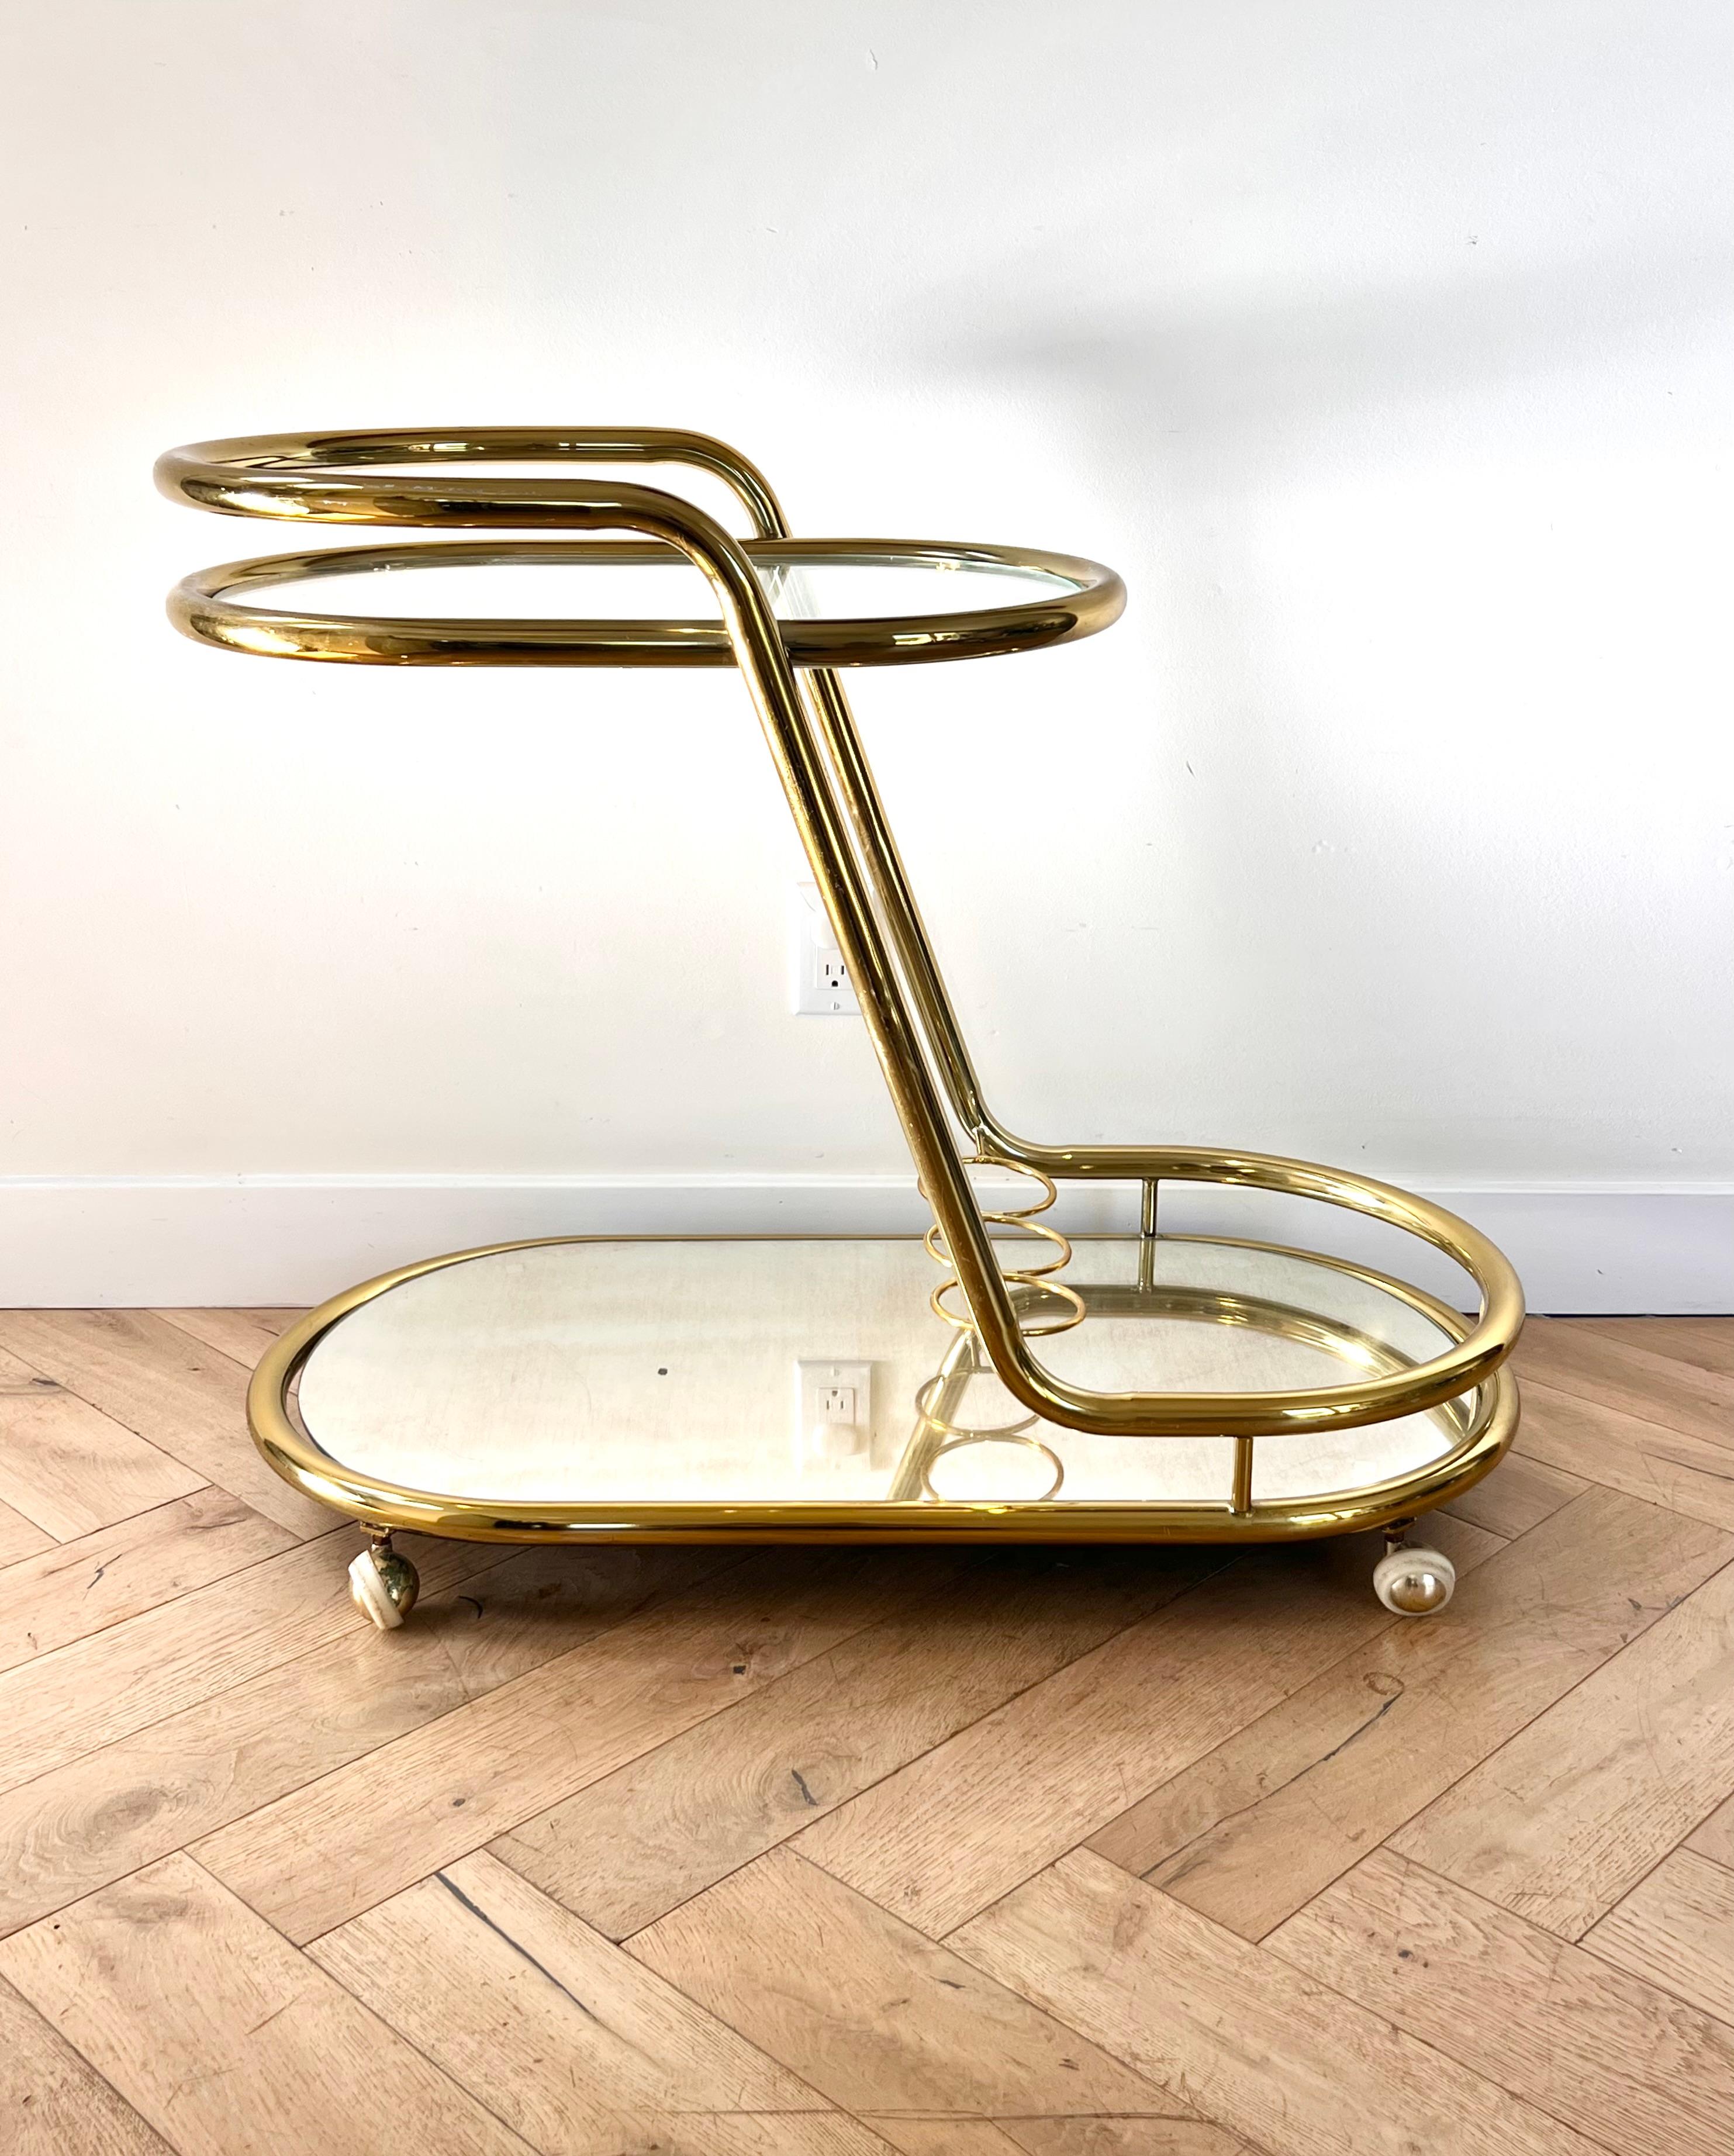 ITALICS: a midcentury two-tier tubular Italian bar cart attributed to Morex, circa 1970s. Featuring a slanted frame in gold plated chrome with glass top and a mirror base, as well as bottle enclaves on the second tier. Both shelves are removable for